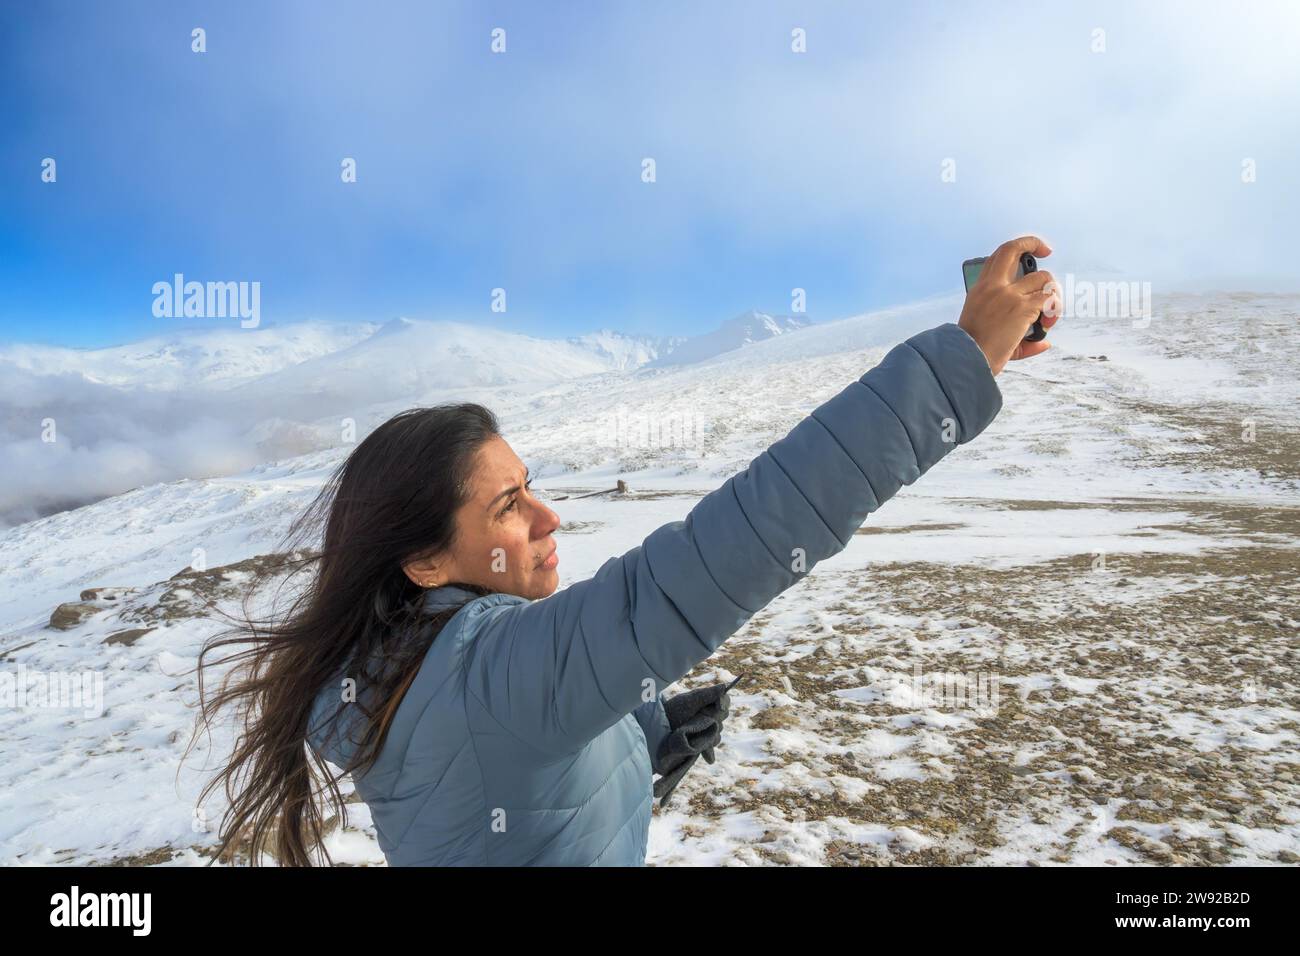 Latina woman taking a selfie with a smartphone while enjoying a winter day in sierra nevada, granada Stock Photo